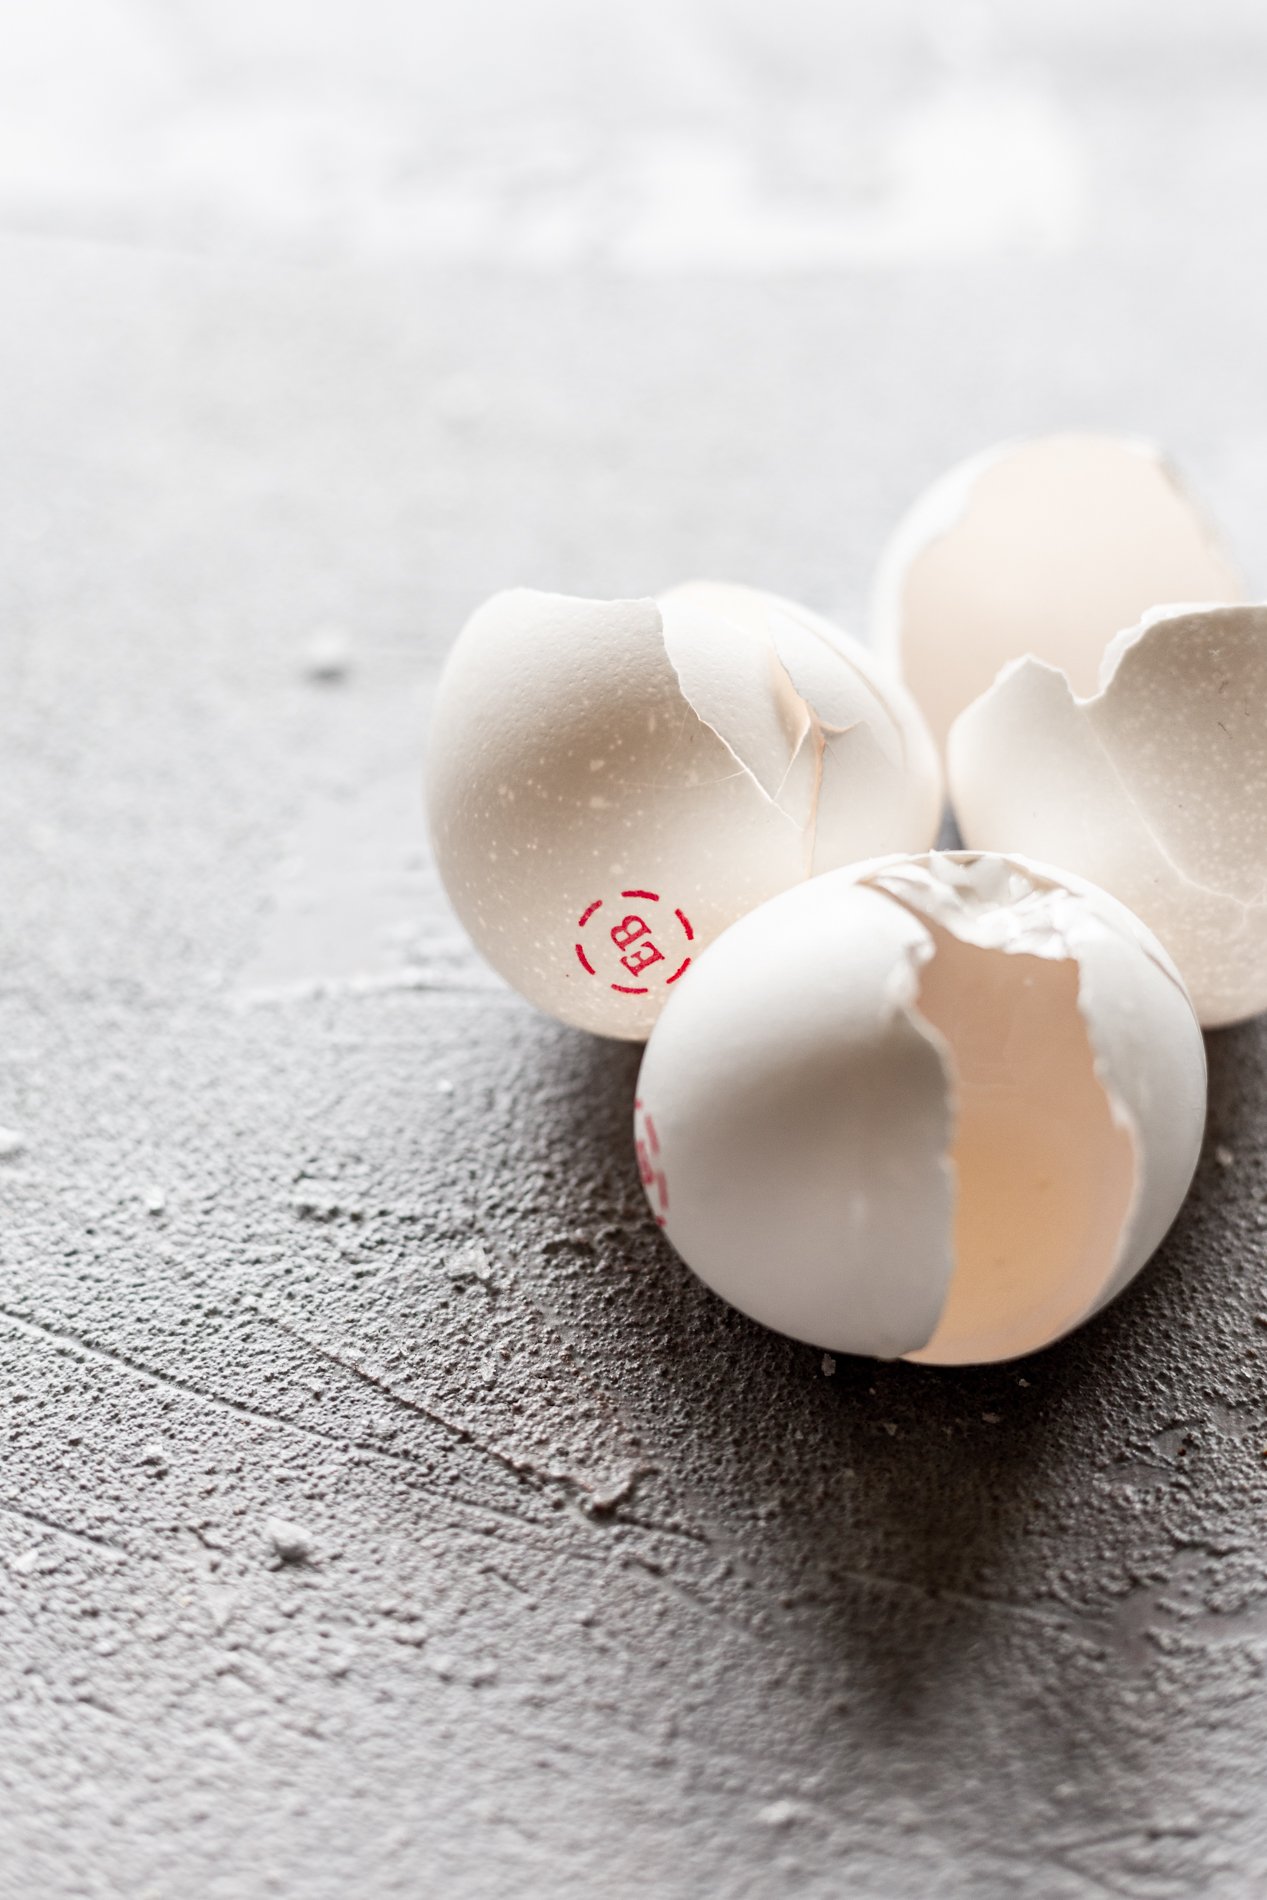 angled view of cracked Eggland's Best eggshells after being used in harissa baked eggs recipe